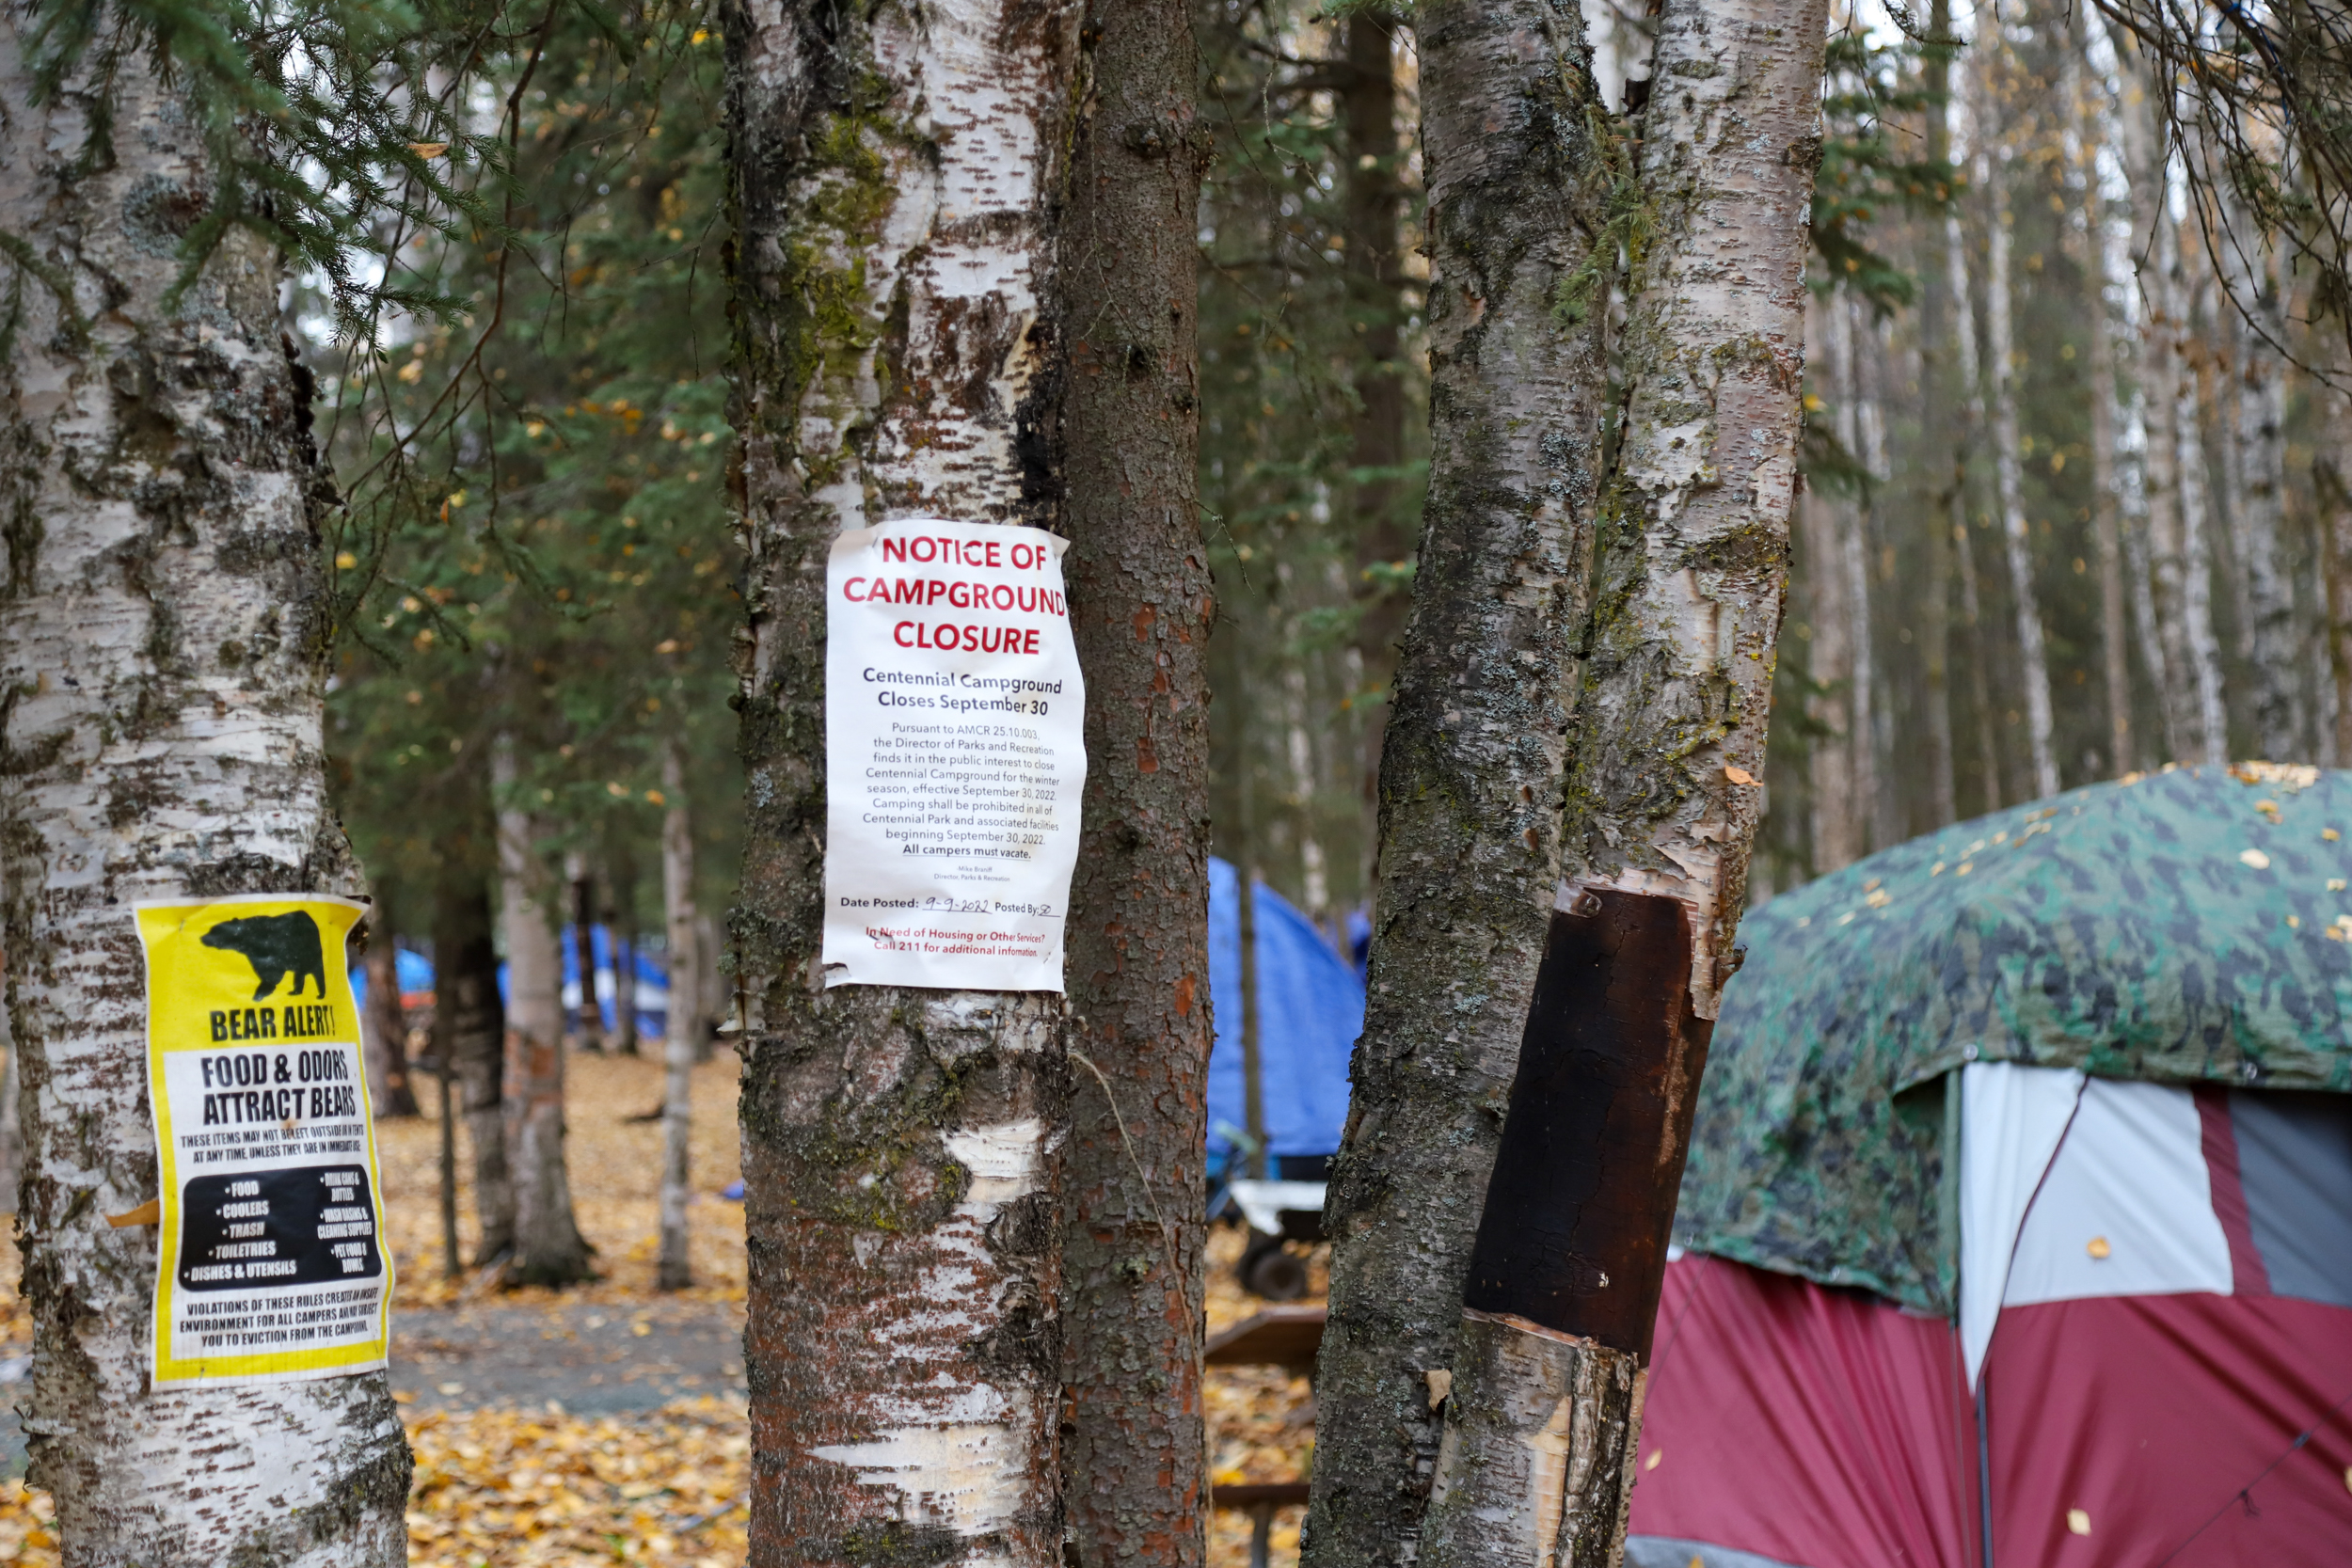 On the trees in the foreground are notices of camp closure and bear warnings. To the right of the trees is a red tent under a camouflage covering.